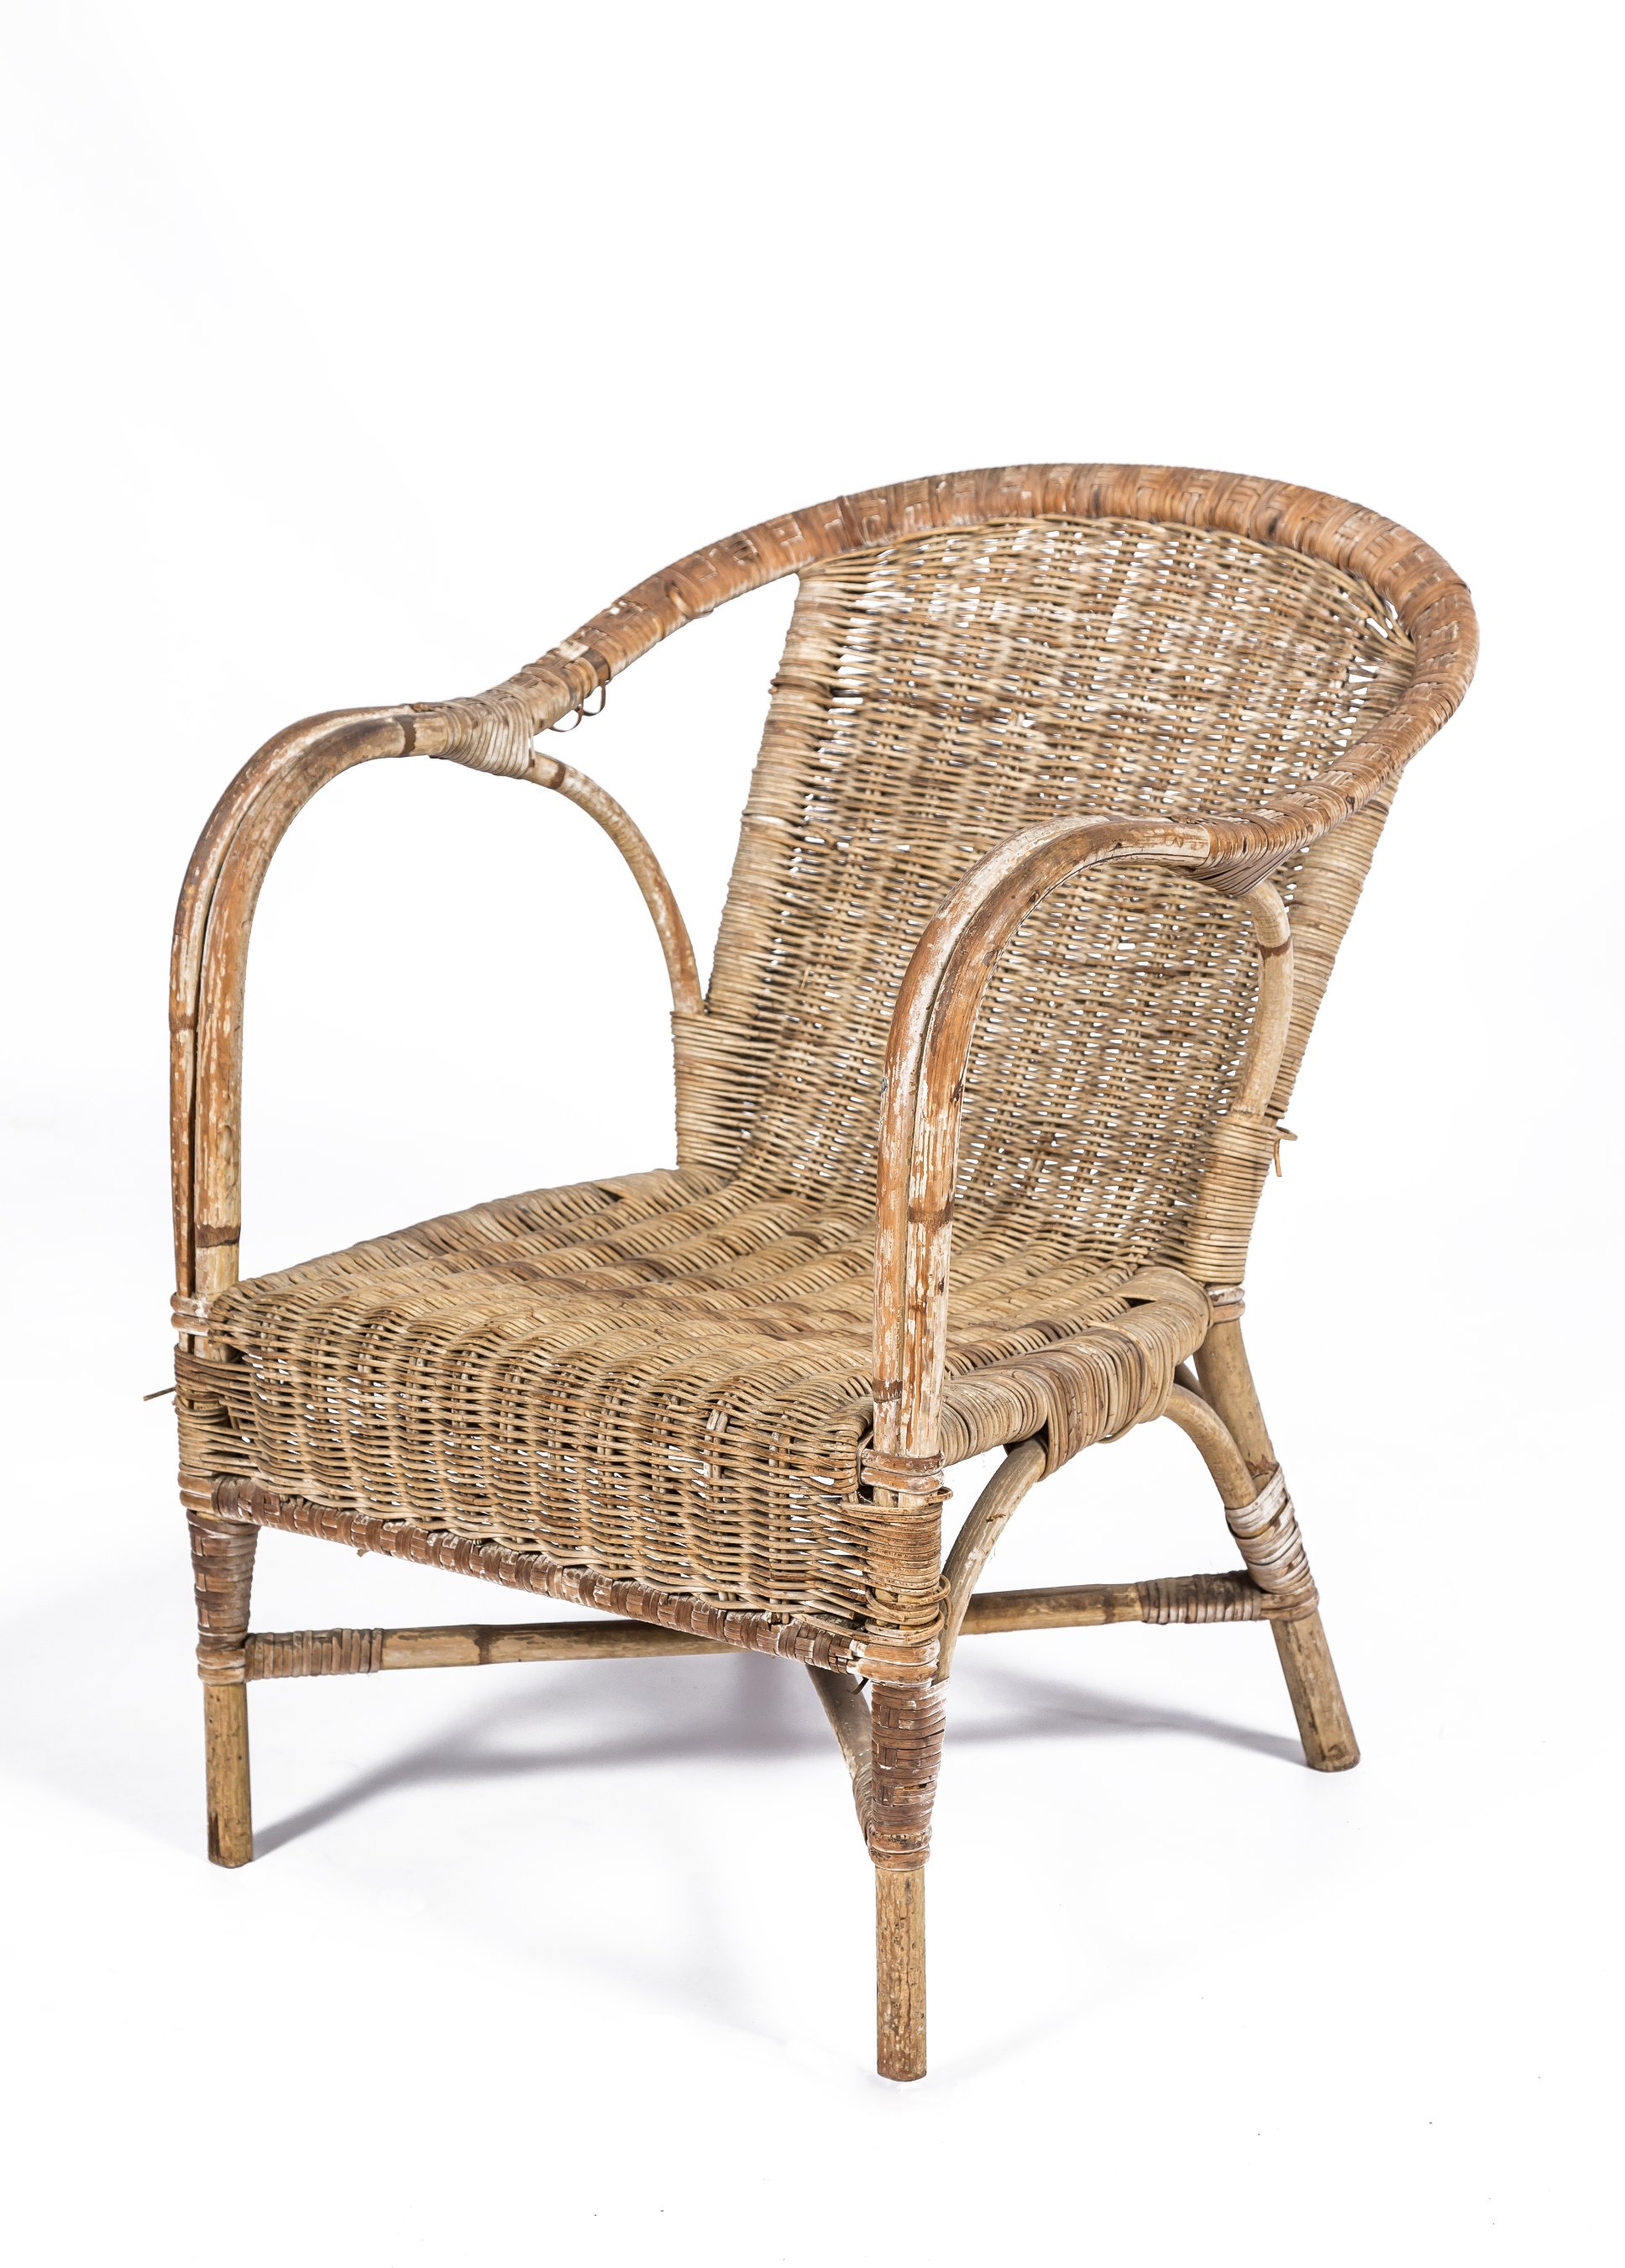 Cane Chair Repair And Restoration, Antique Wicker Chairs Uk